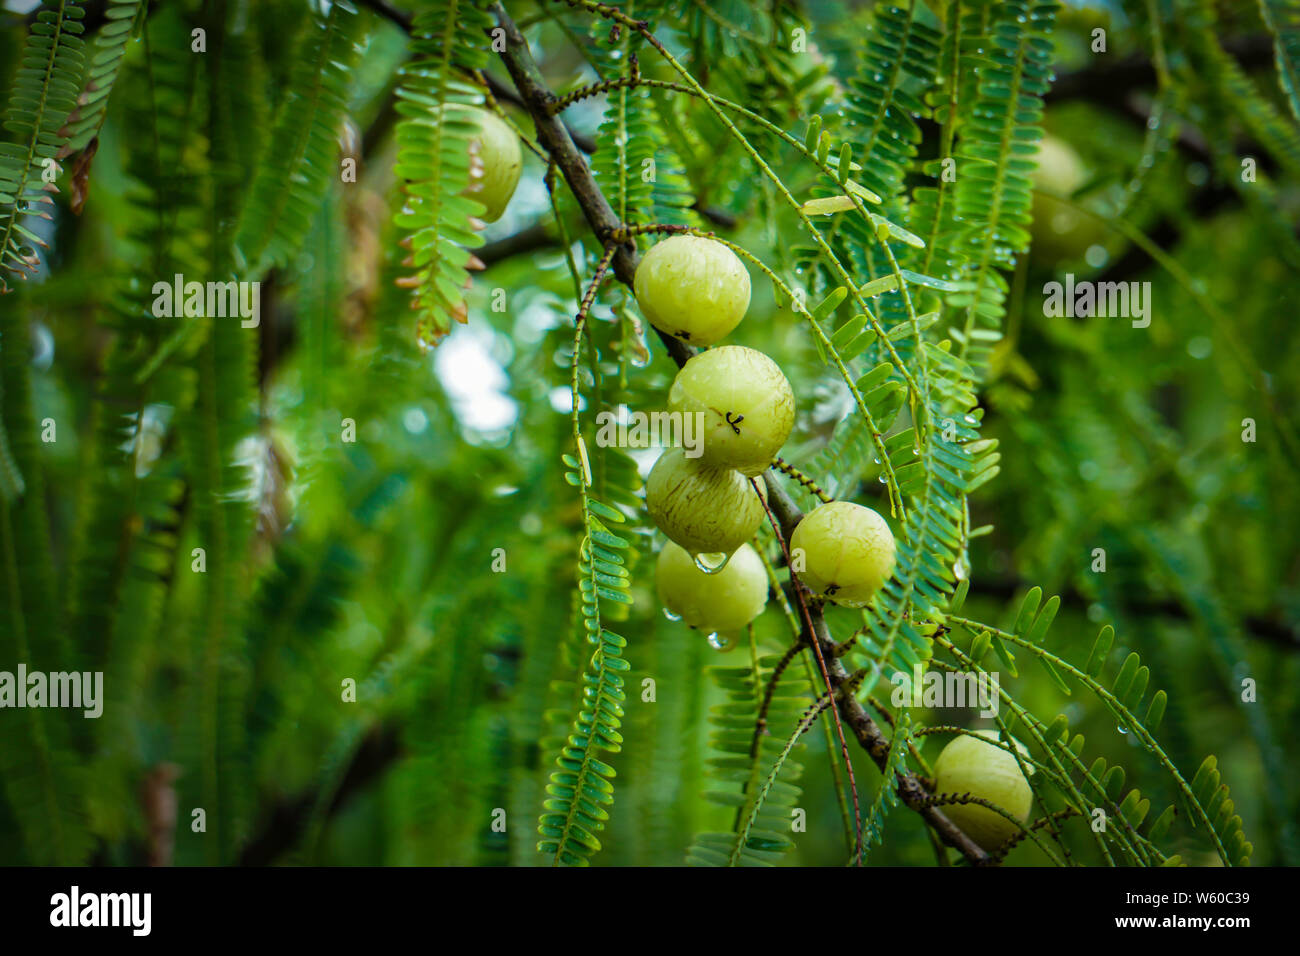 It's the Amalaki fruit (also know as, Emblica officinalis, Amla, or the Indian Gooseberry). Until the introduction of the Zrii nutritive beverage Stock Photo